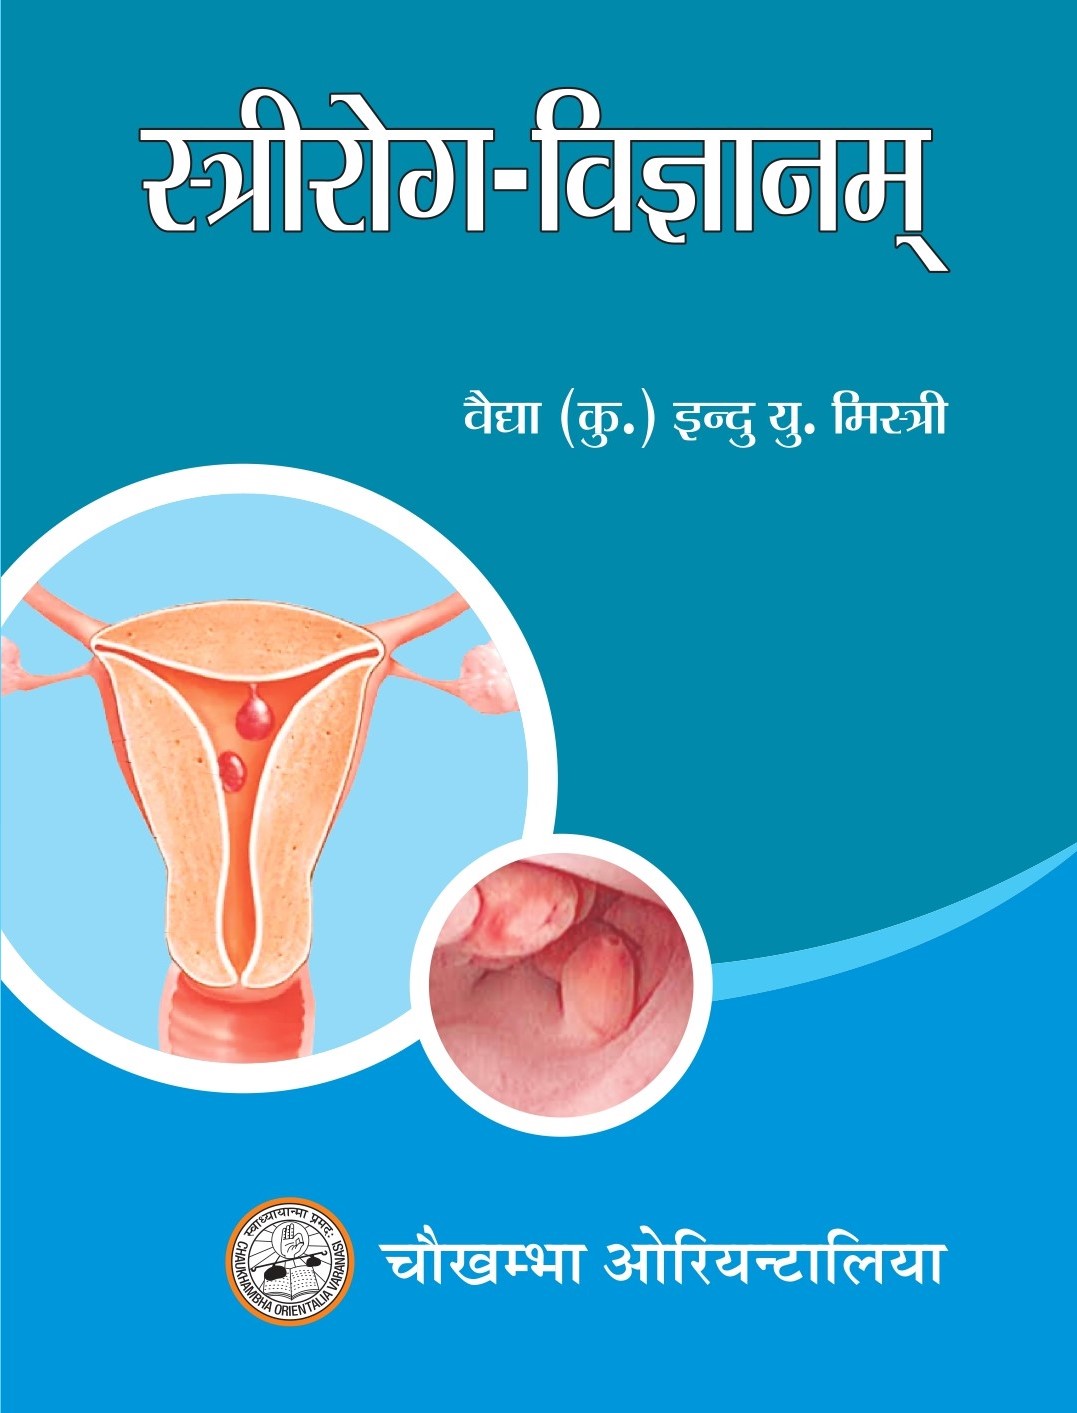 Front cover of textbook for stree roga of BAMS 3rd year degree.